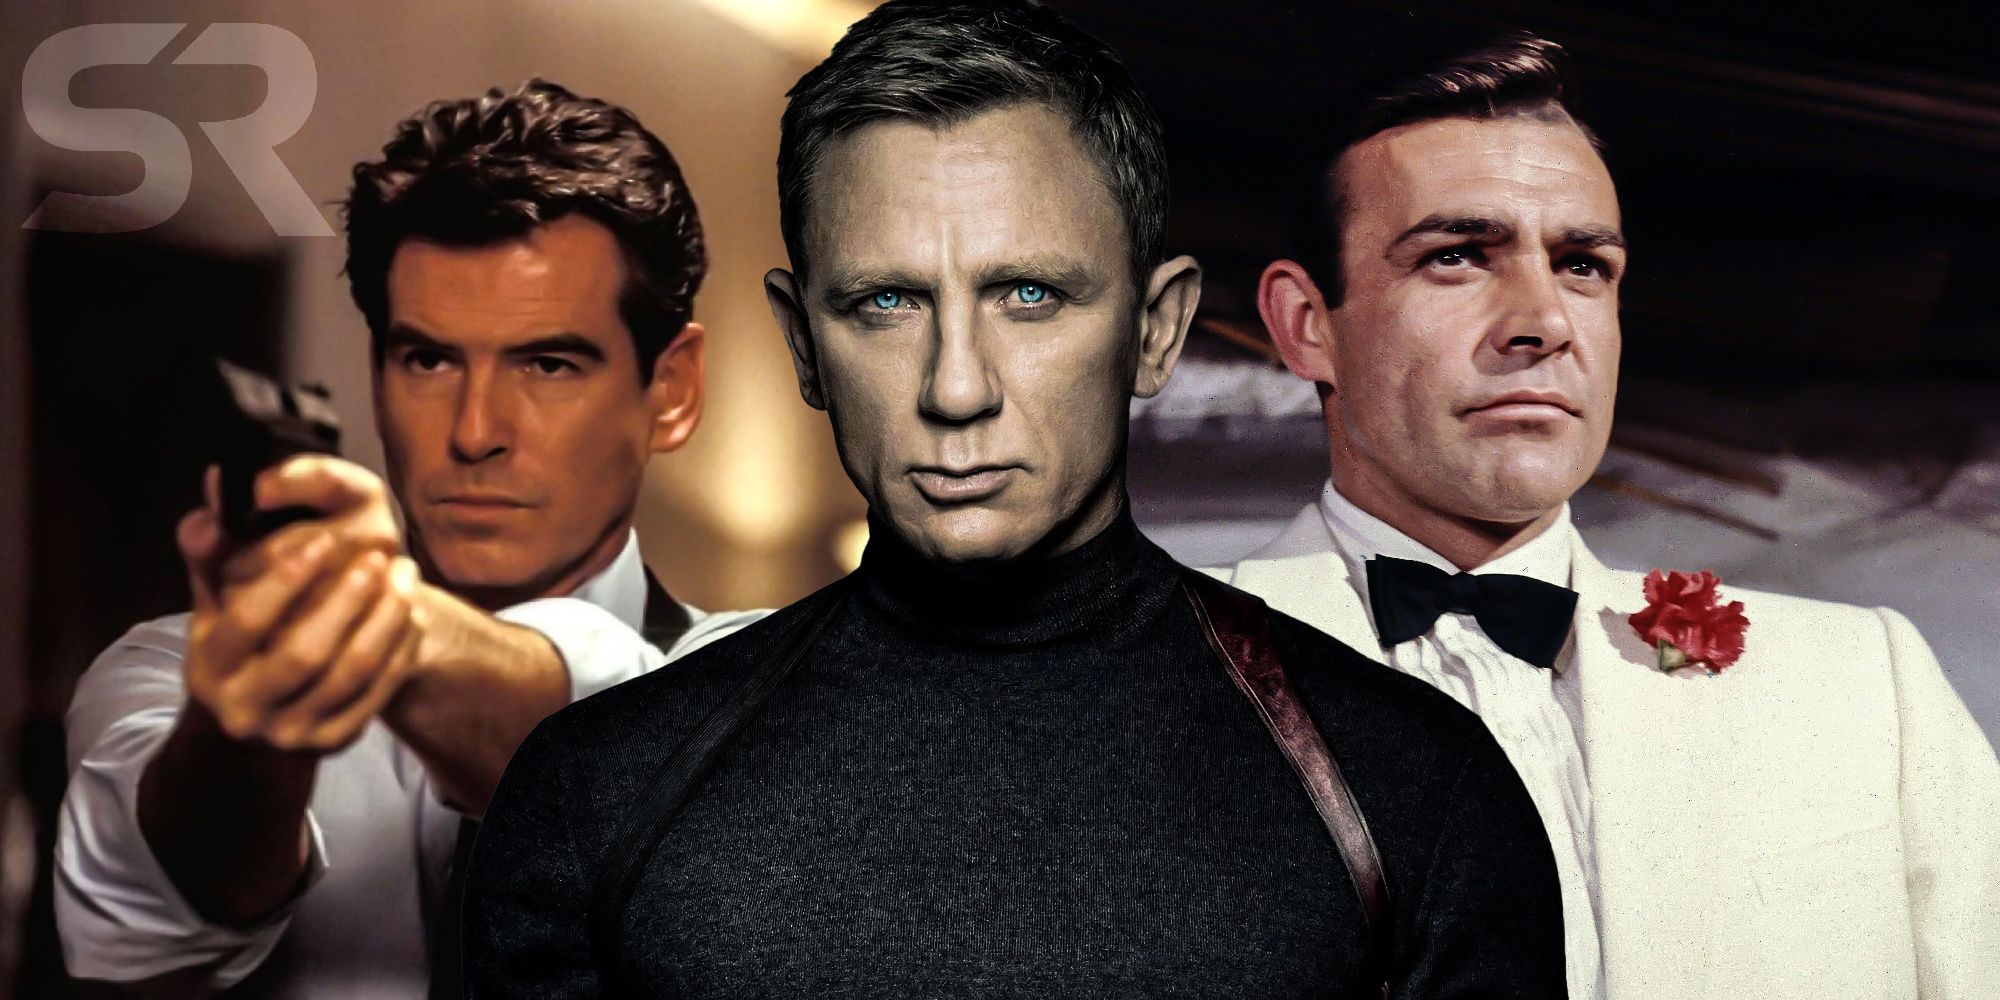 Blended image of Pierce Brosnan, Daniel Craig, and Sean Connery in James Bond films.